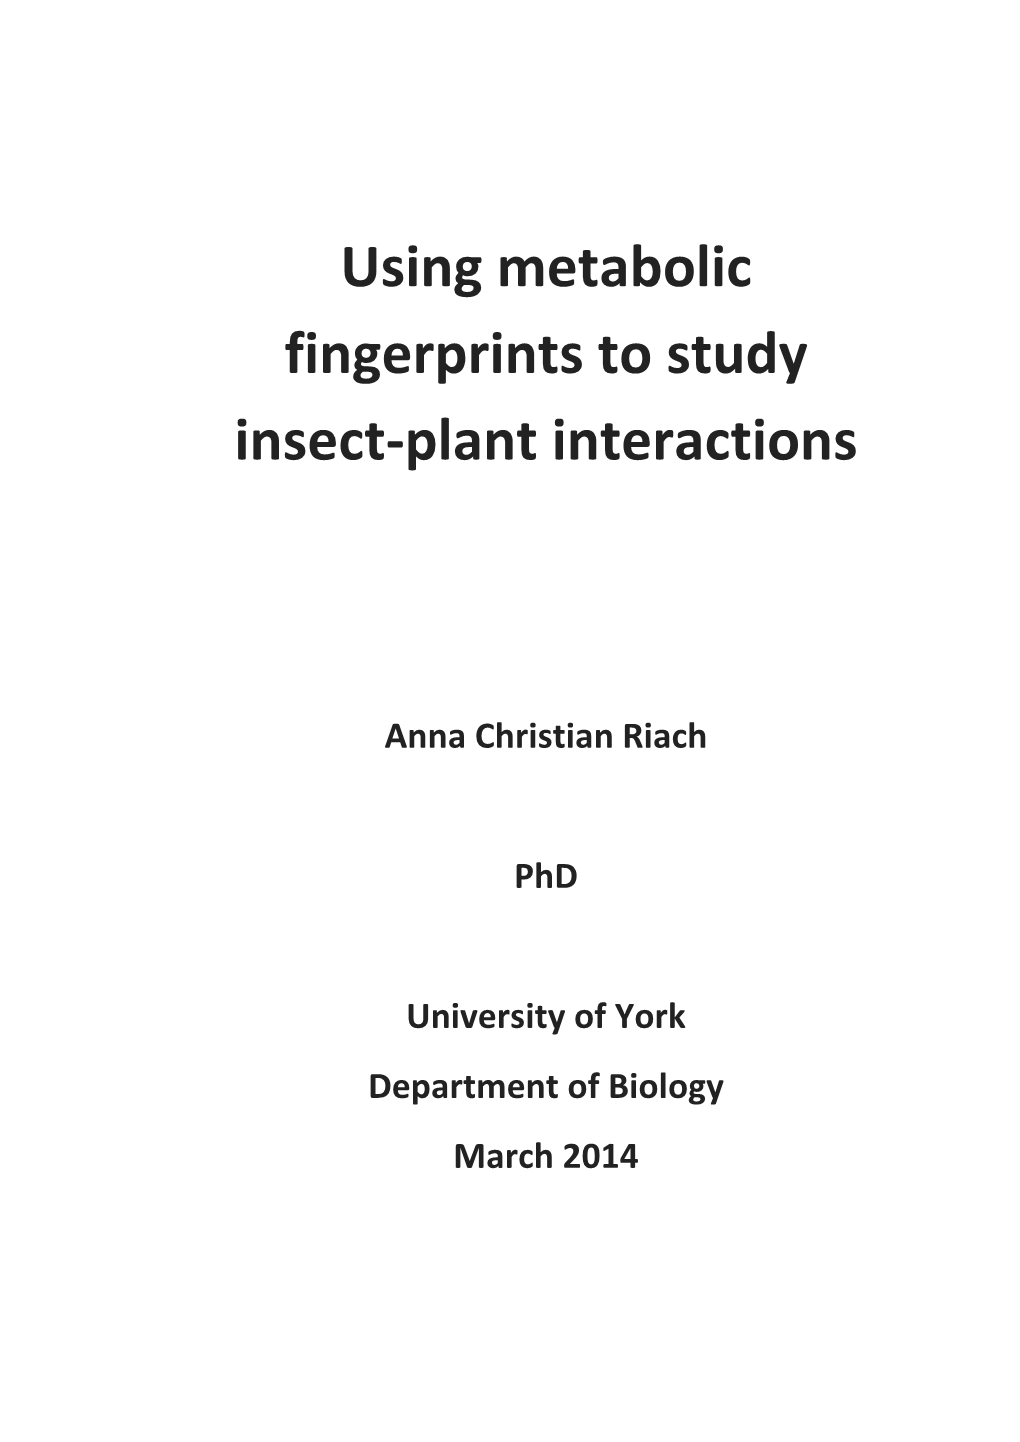 Using Metabolic Fingerprints to Study Insect-Plant Interactions